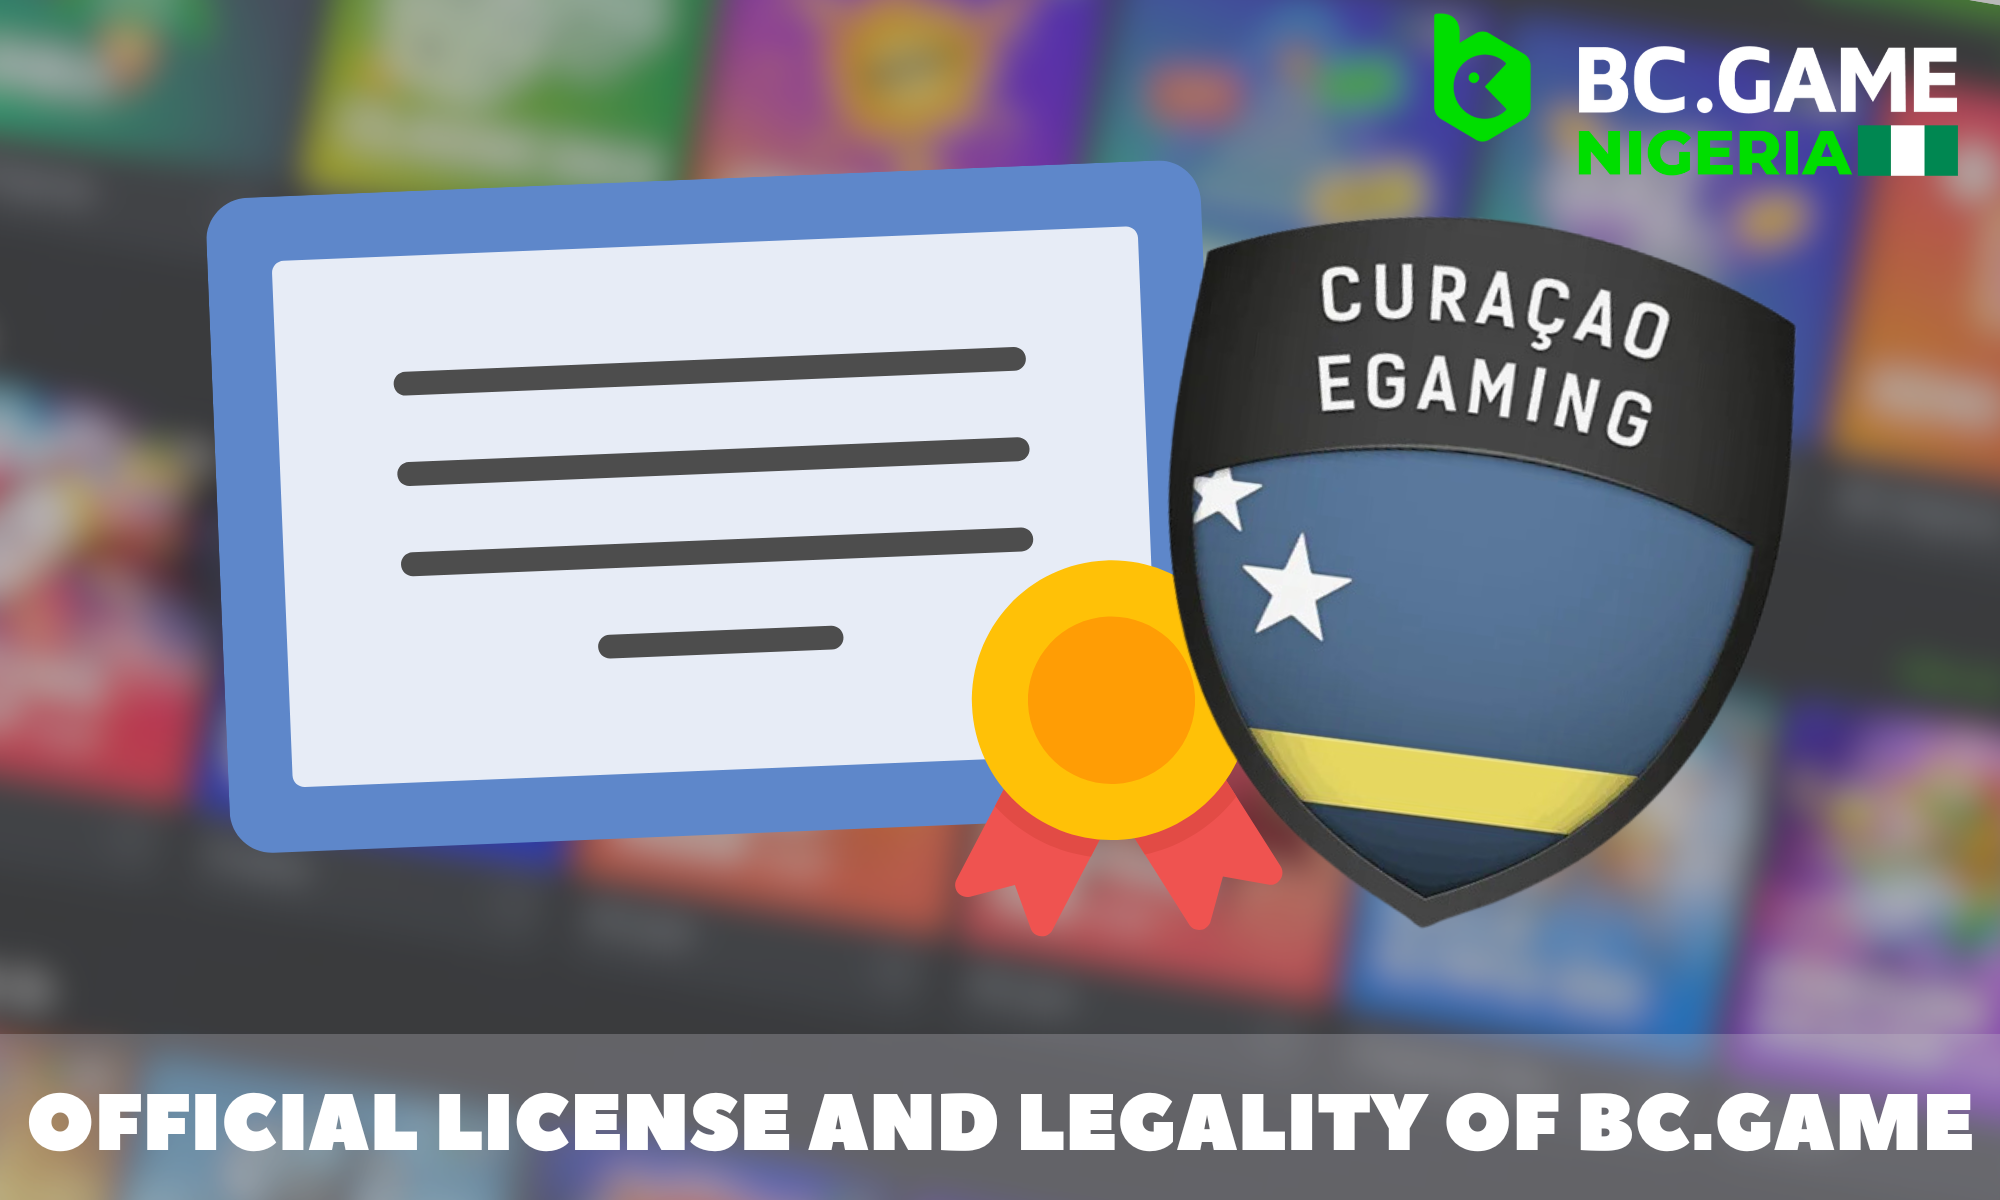 BC.Game casino is officially licensed and operates legally in Nigeria